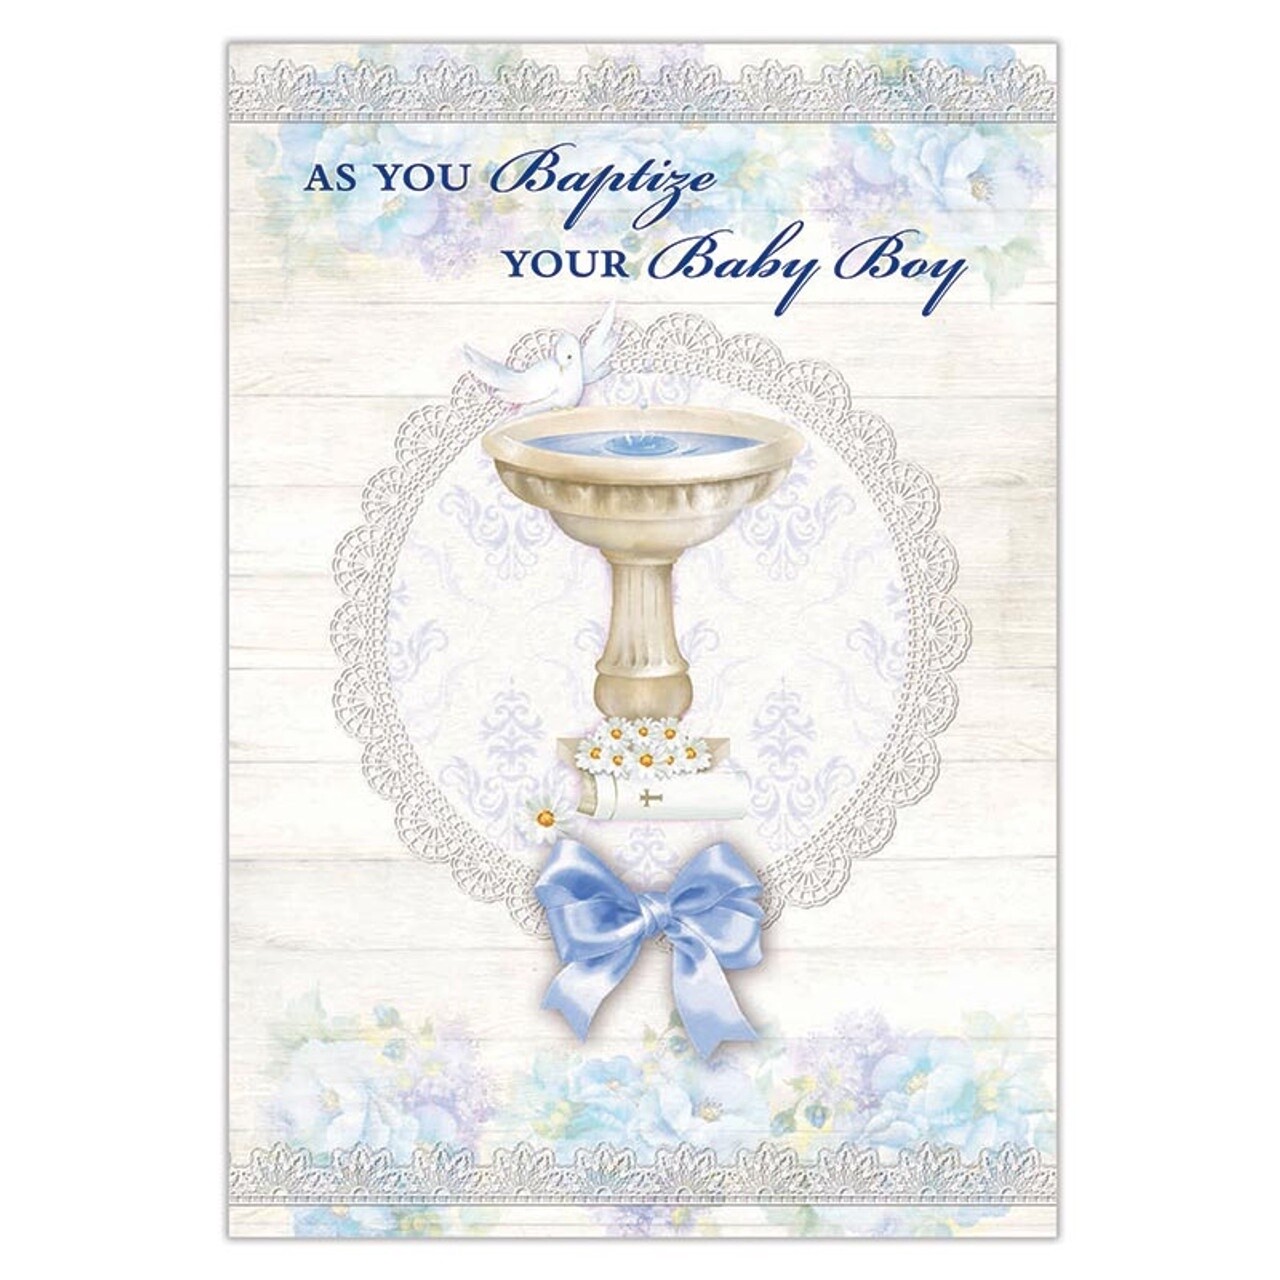 As You Baptize Your Baby Boy Card